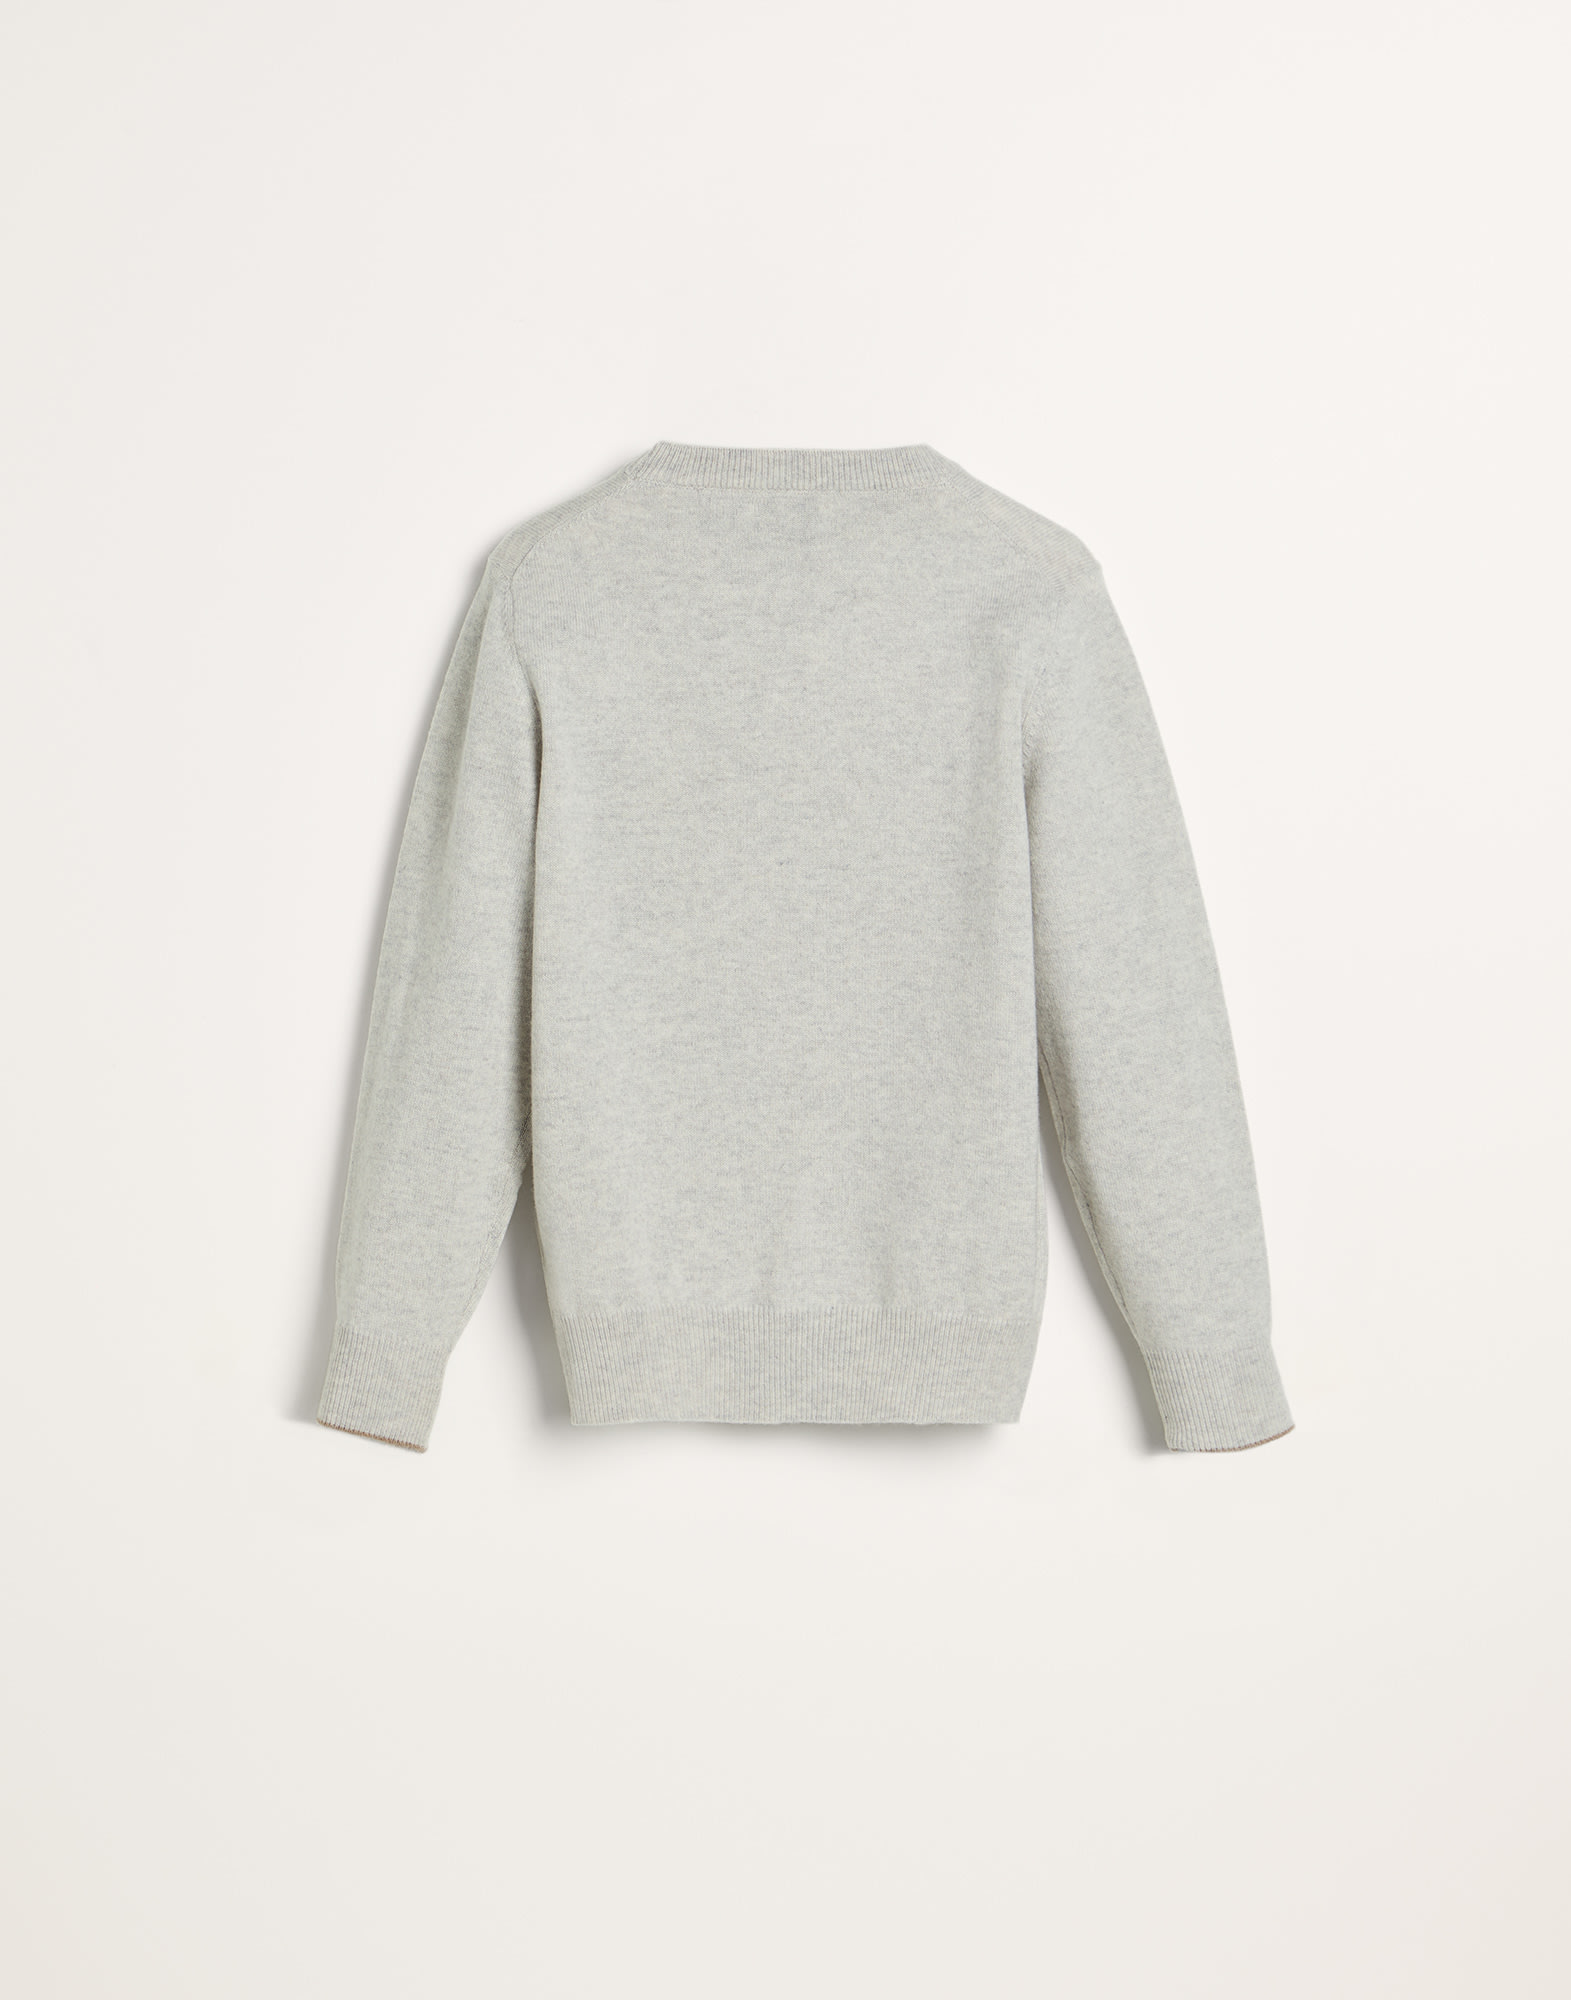 Boys Clothing, Pure Cashmere Wool Sweater